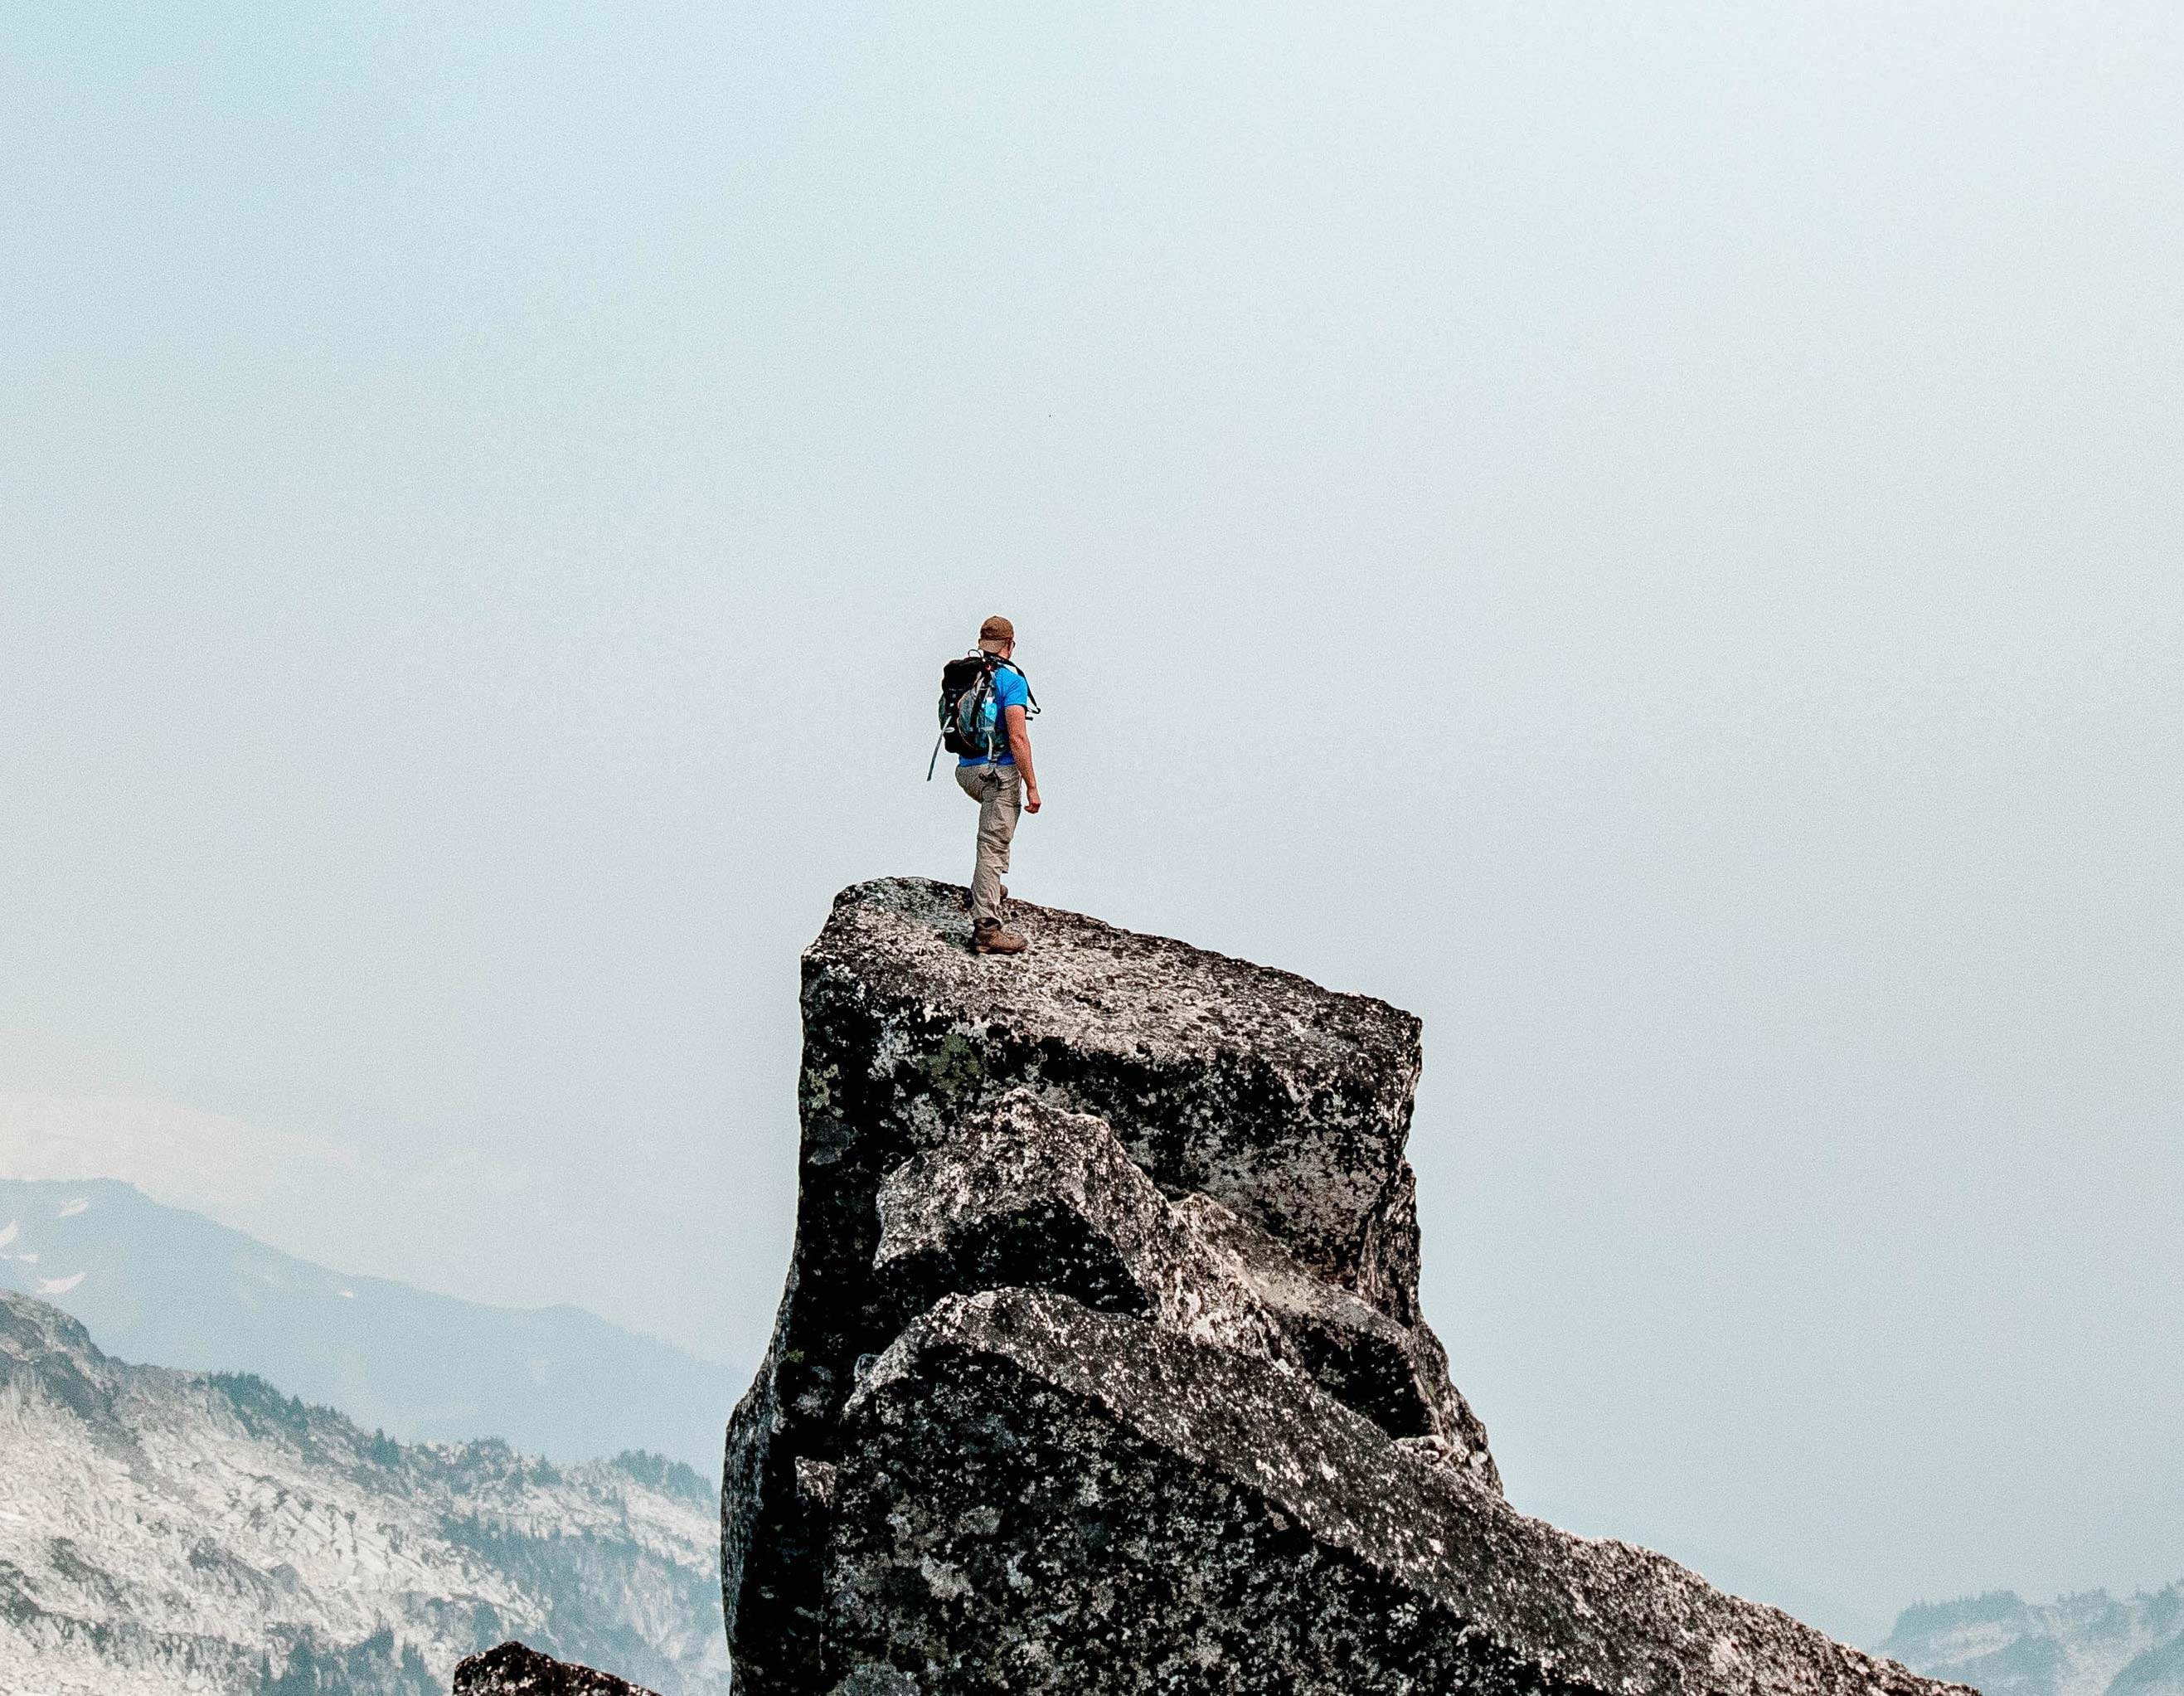 Mountain climber standing at the peak of a mountain.